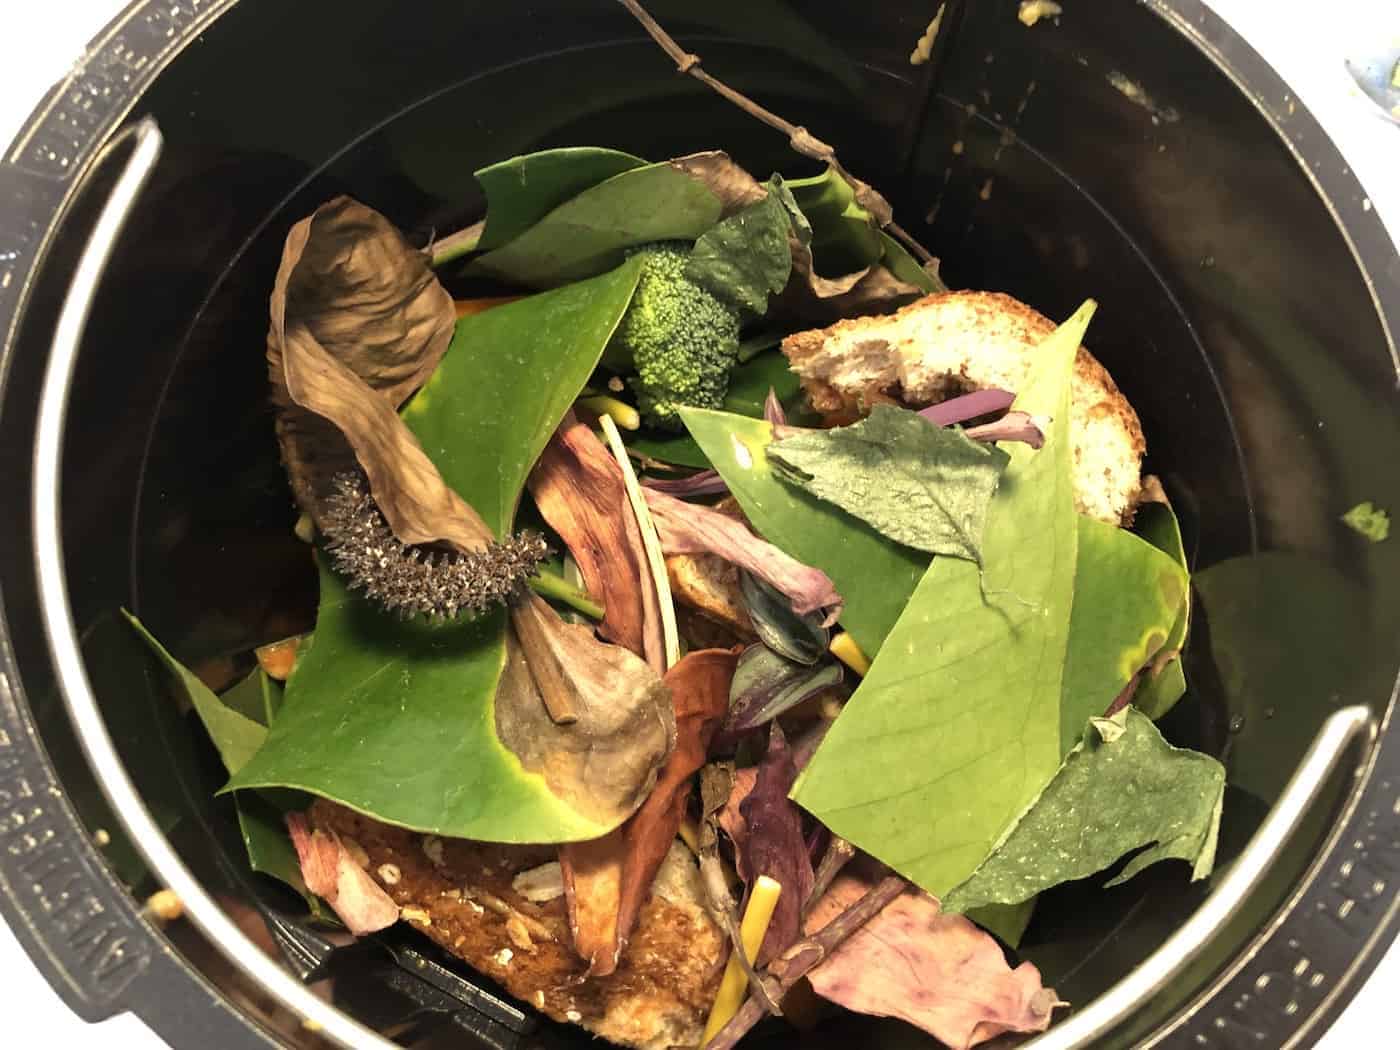 Filling lomi bucket with food waste - what can go in